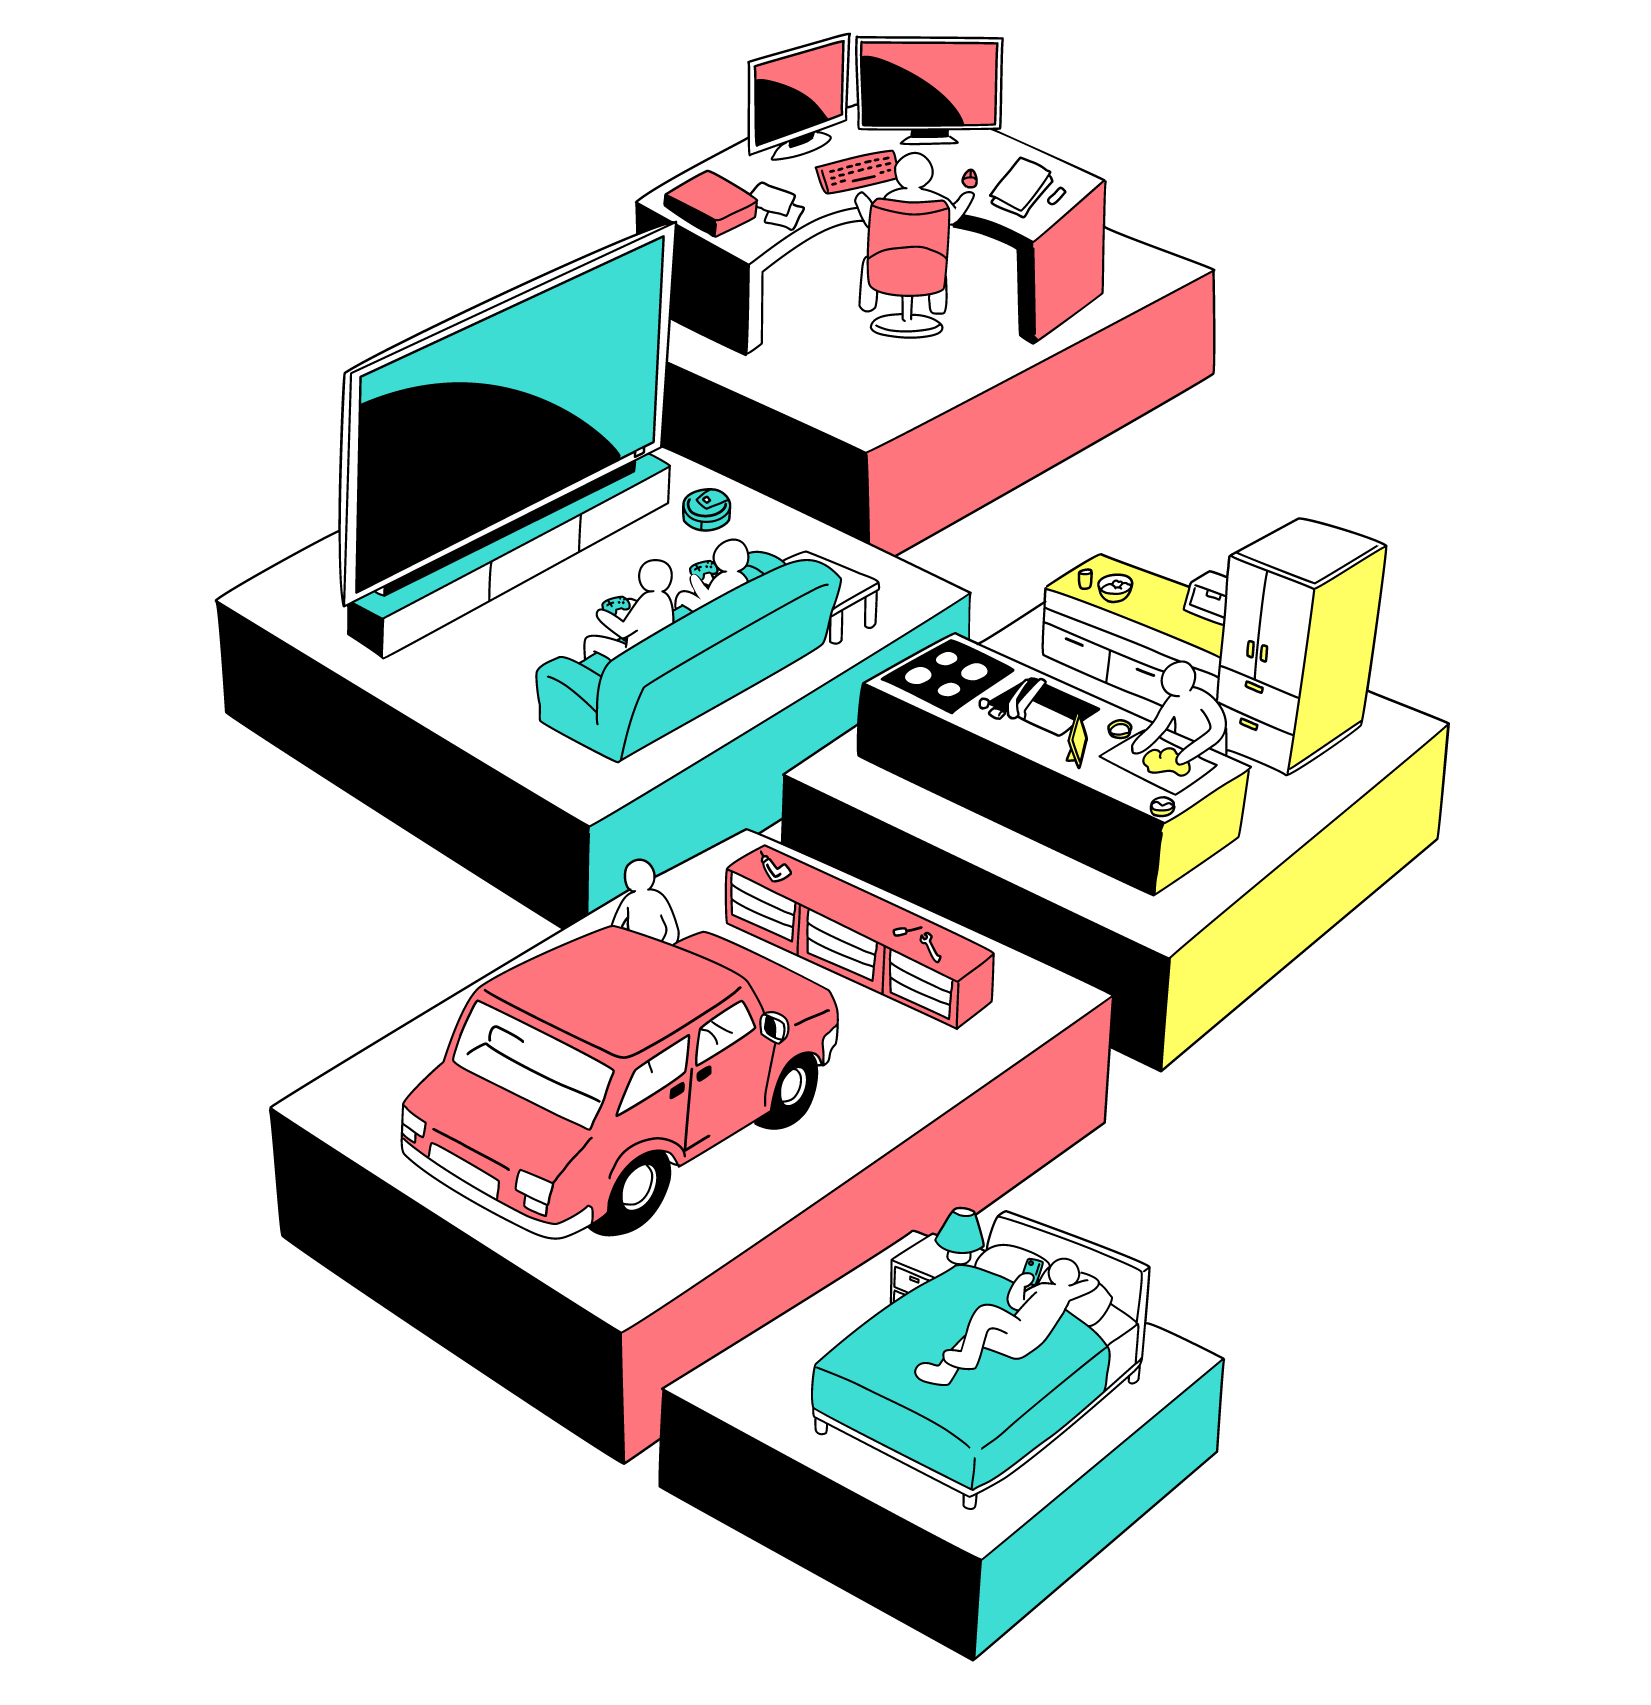 Illustration of different family members using tech in their daily life: people playing video games, person working on computer with multiple screens, family watching TV, person cooking in tech enabled kitchen, person working on a car in garage, person in bed on a smartphone.